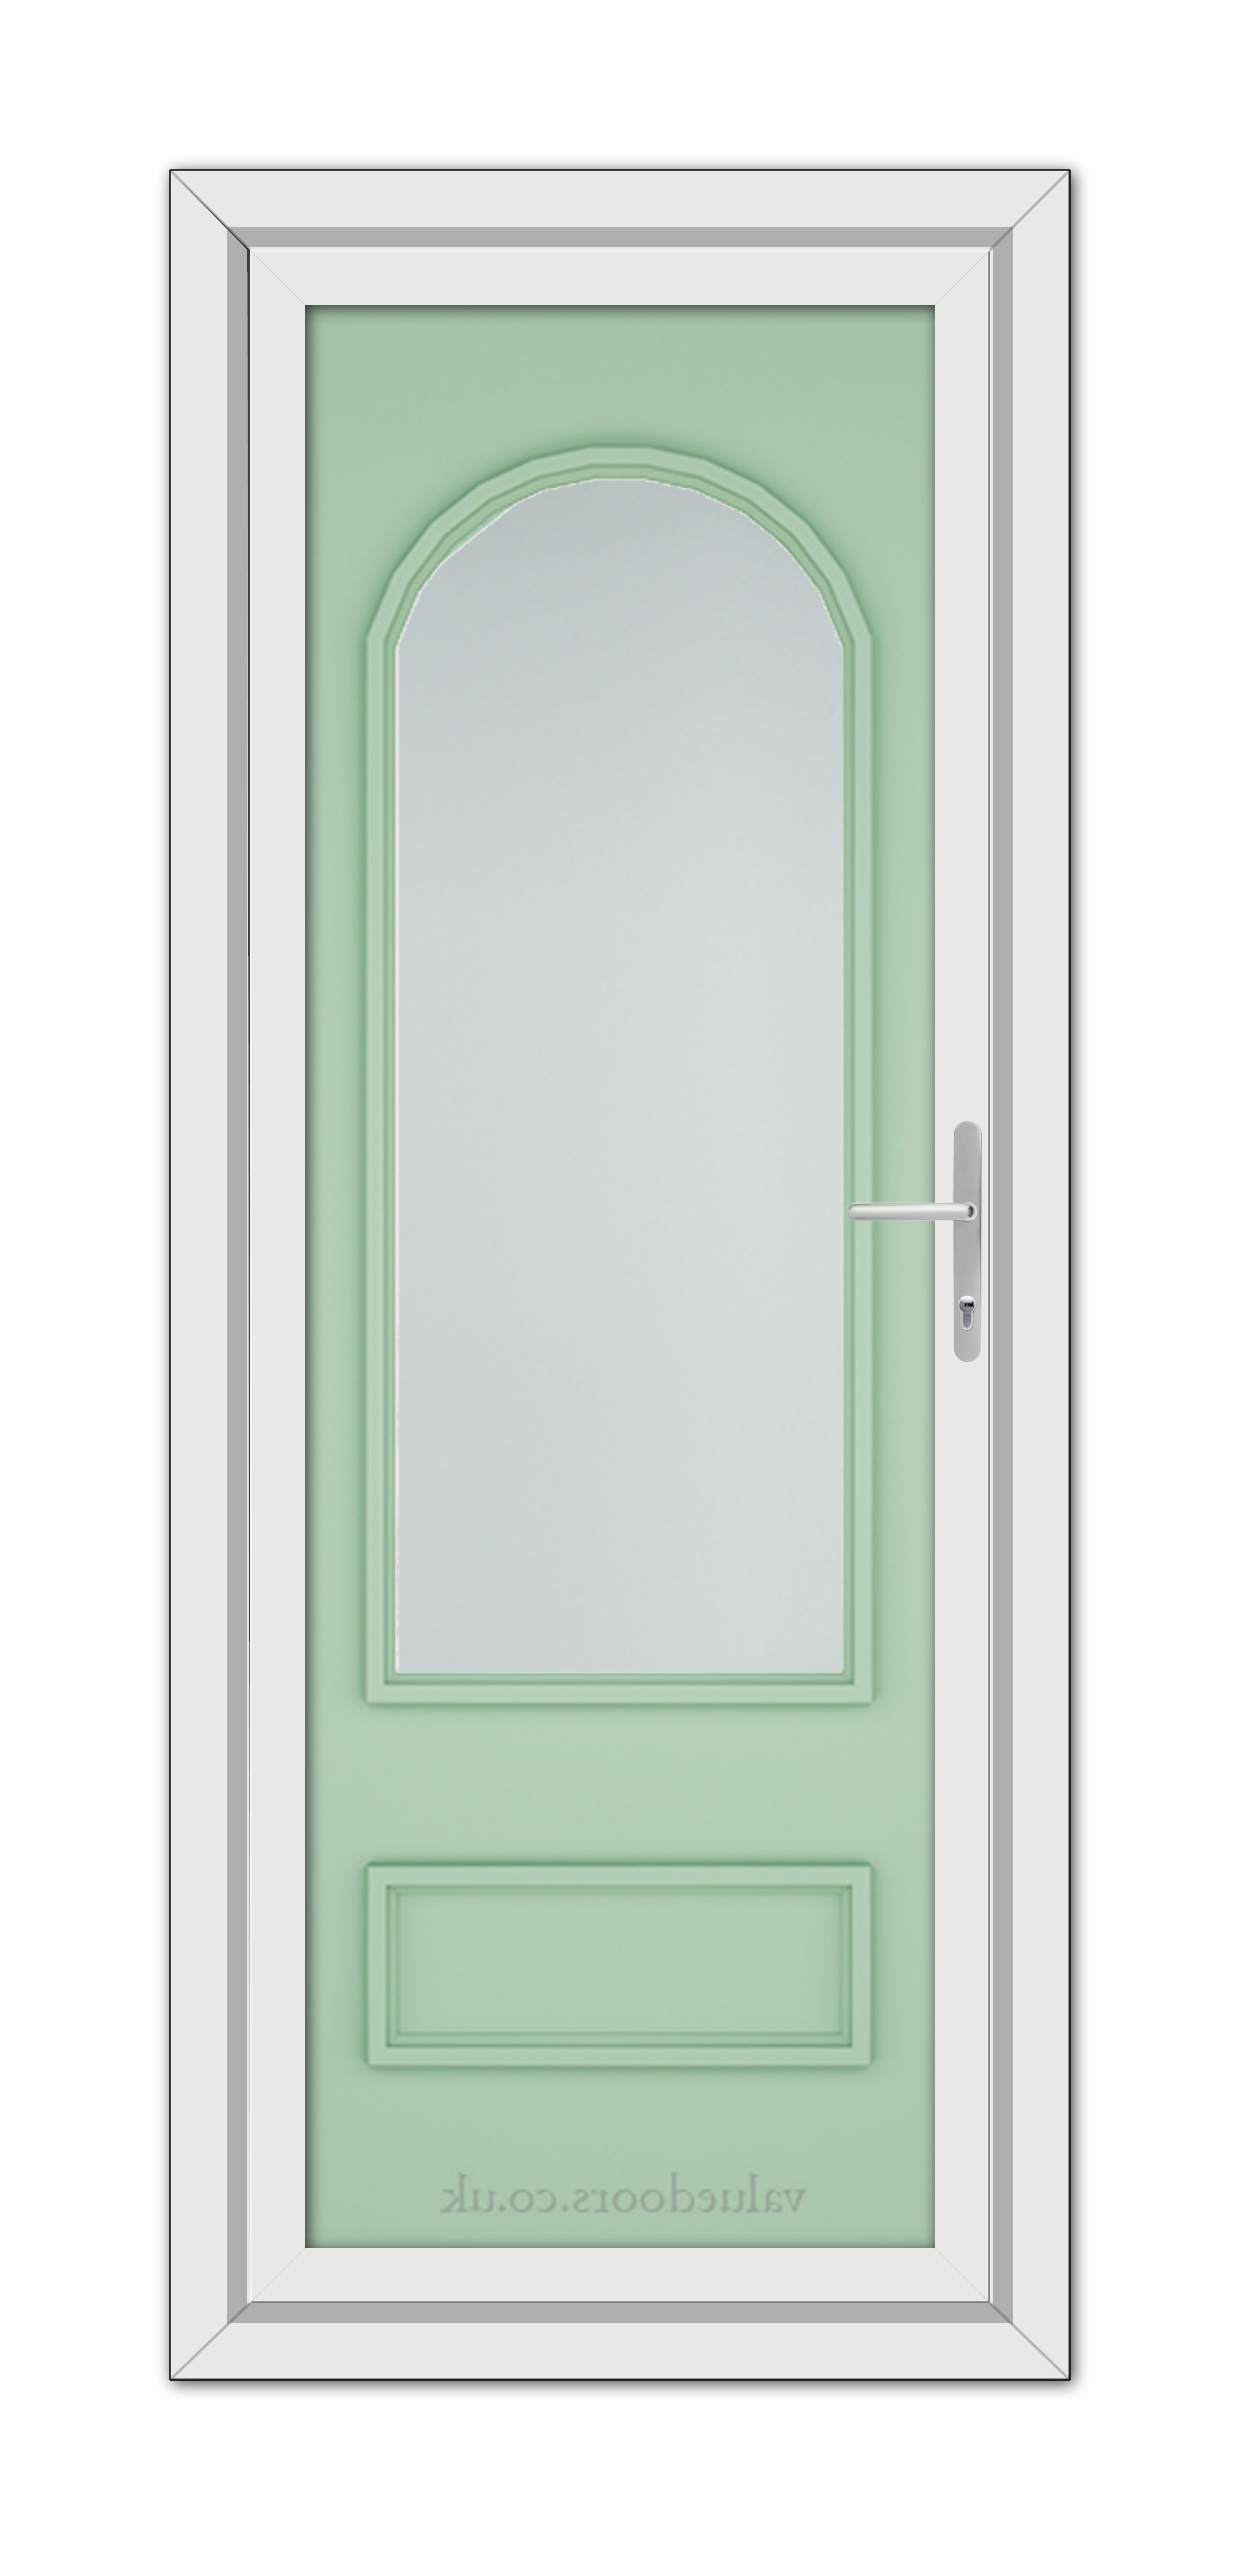 A Chartwell Green Canterbury uPVC door with a vertical arched window and a metal handle, set in a white door frame.